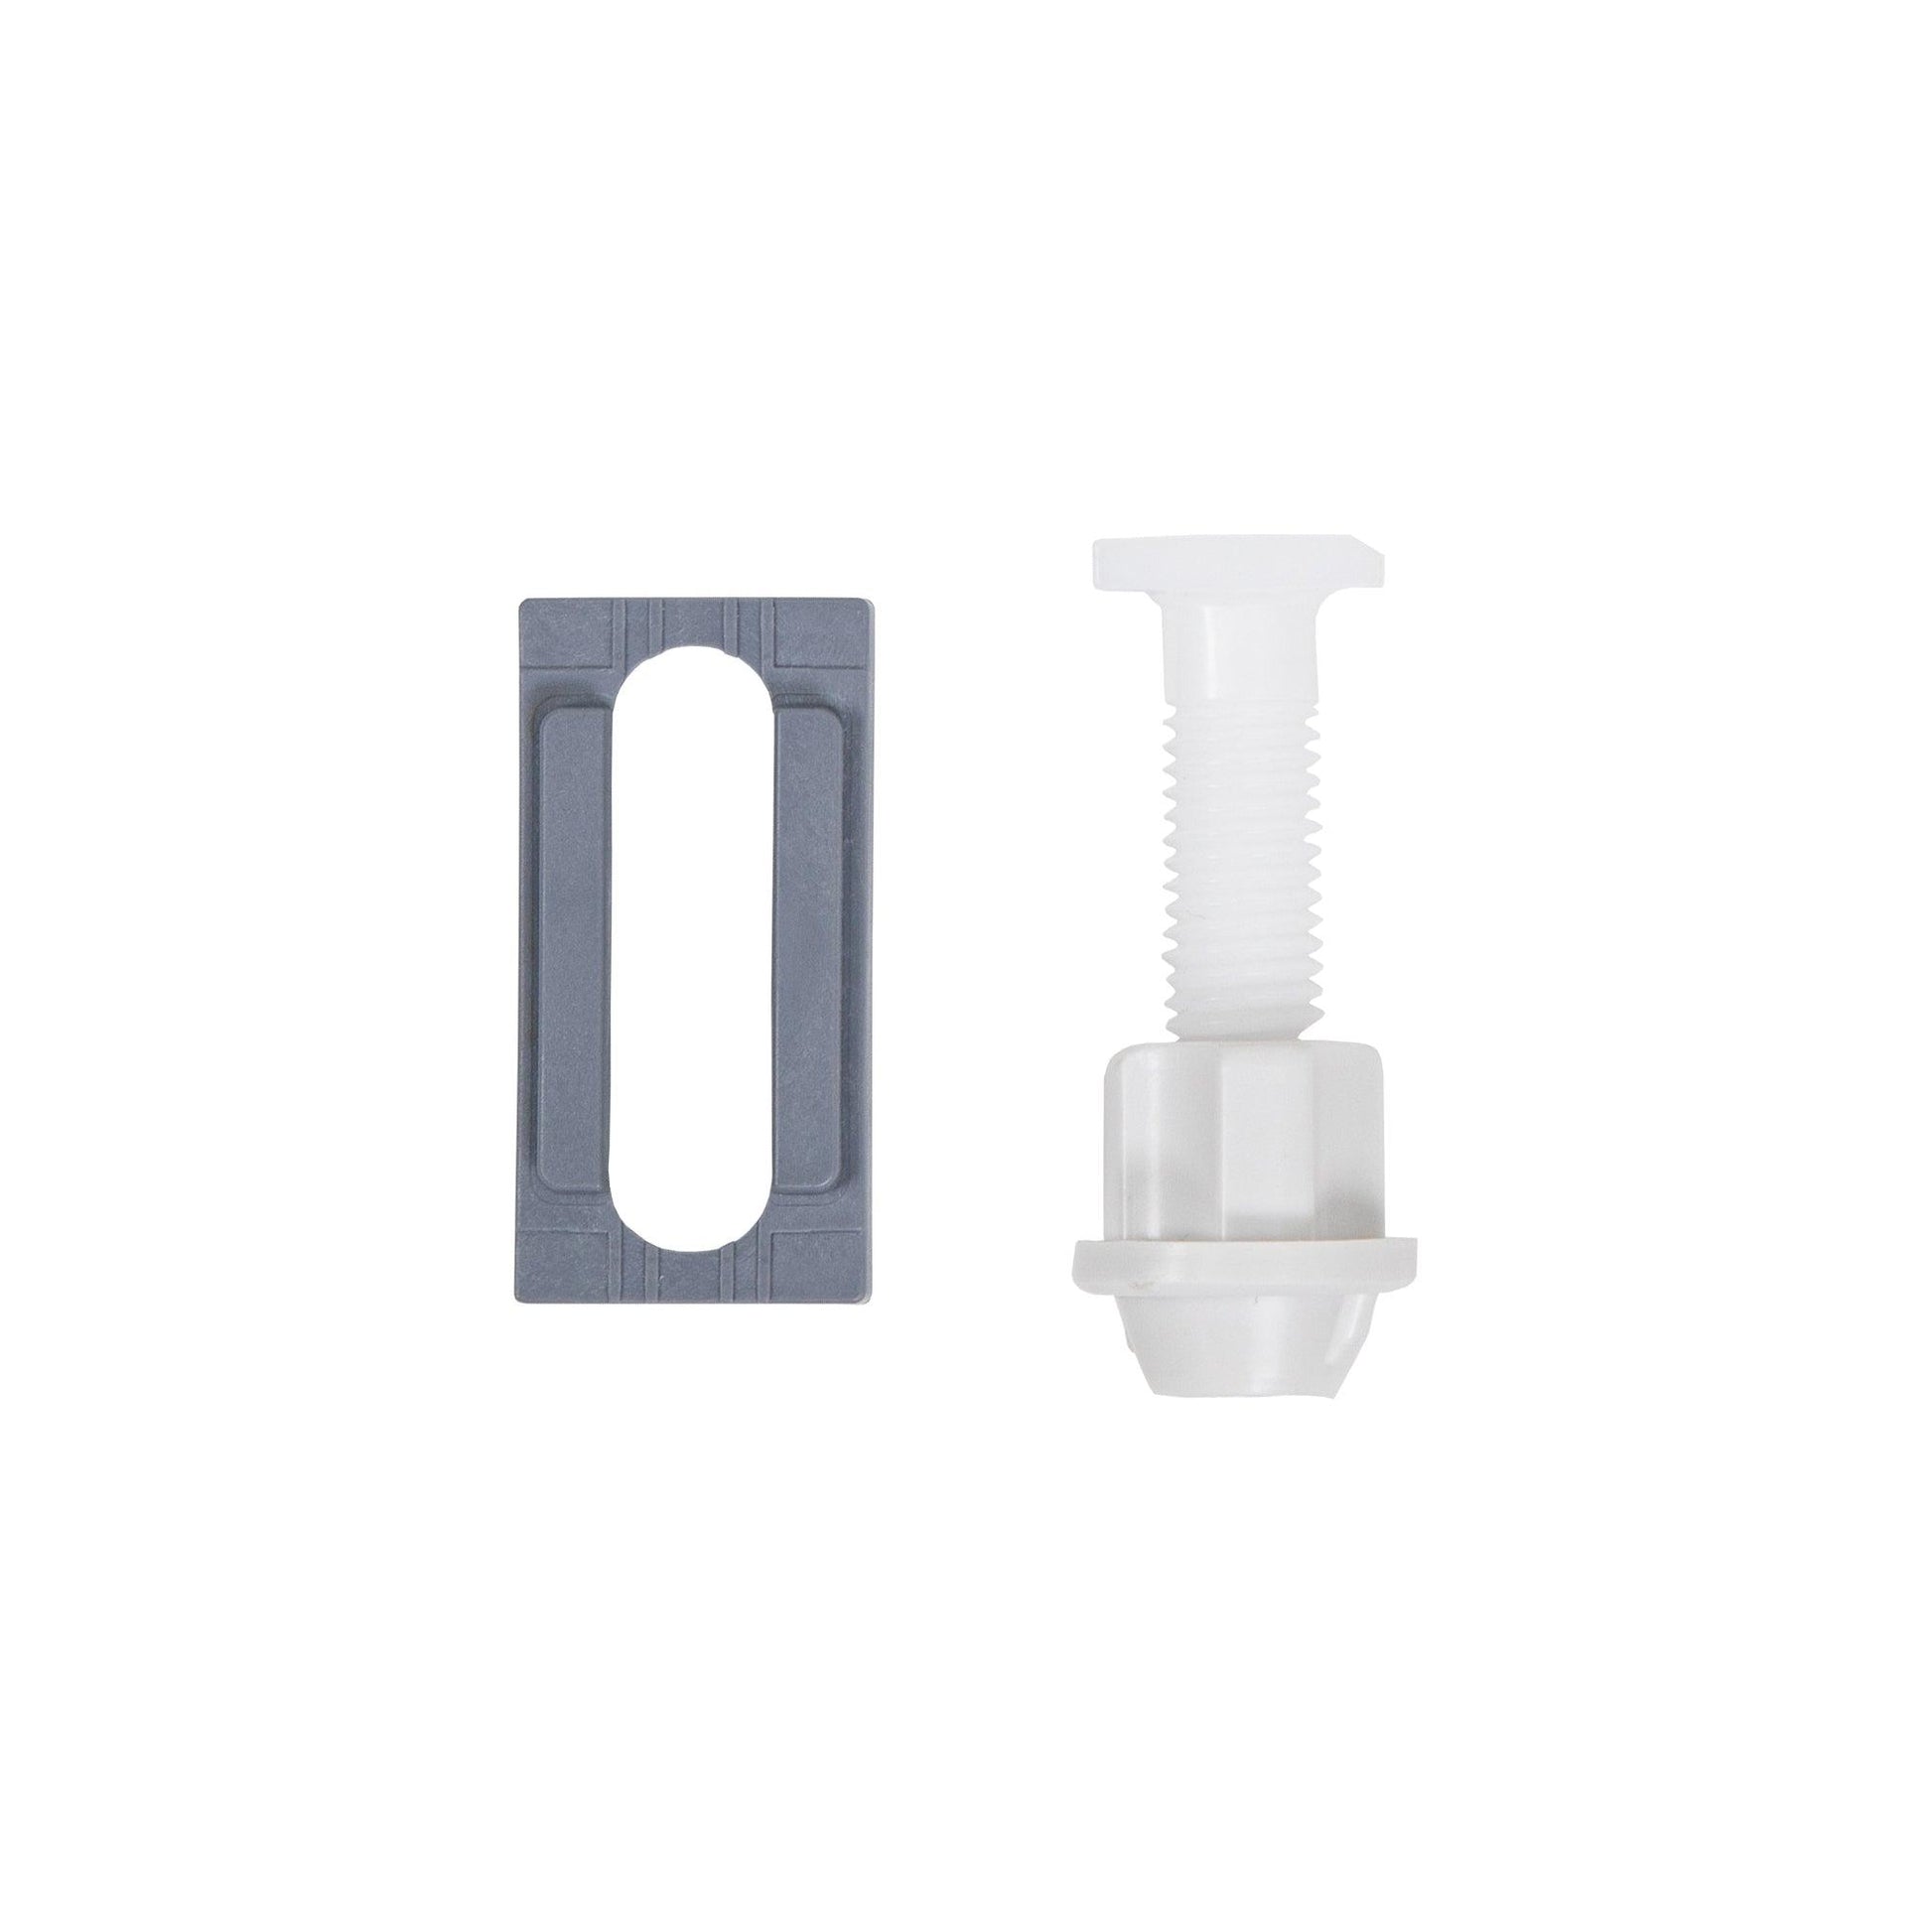 Bidet Mounting Plate Kit - Inus Home USA｜Pleasant Living Experience!